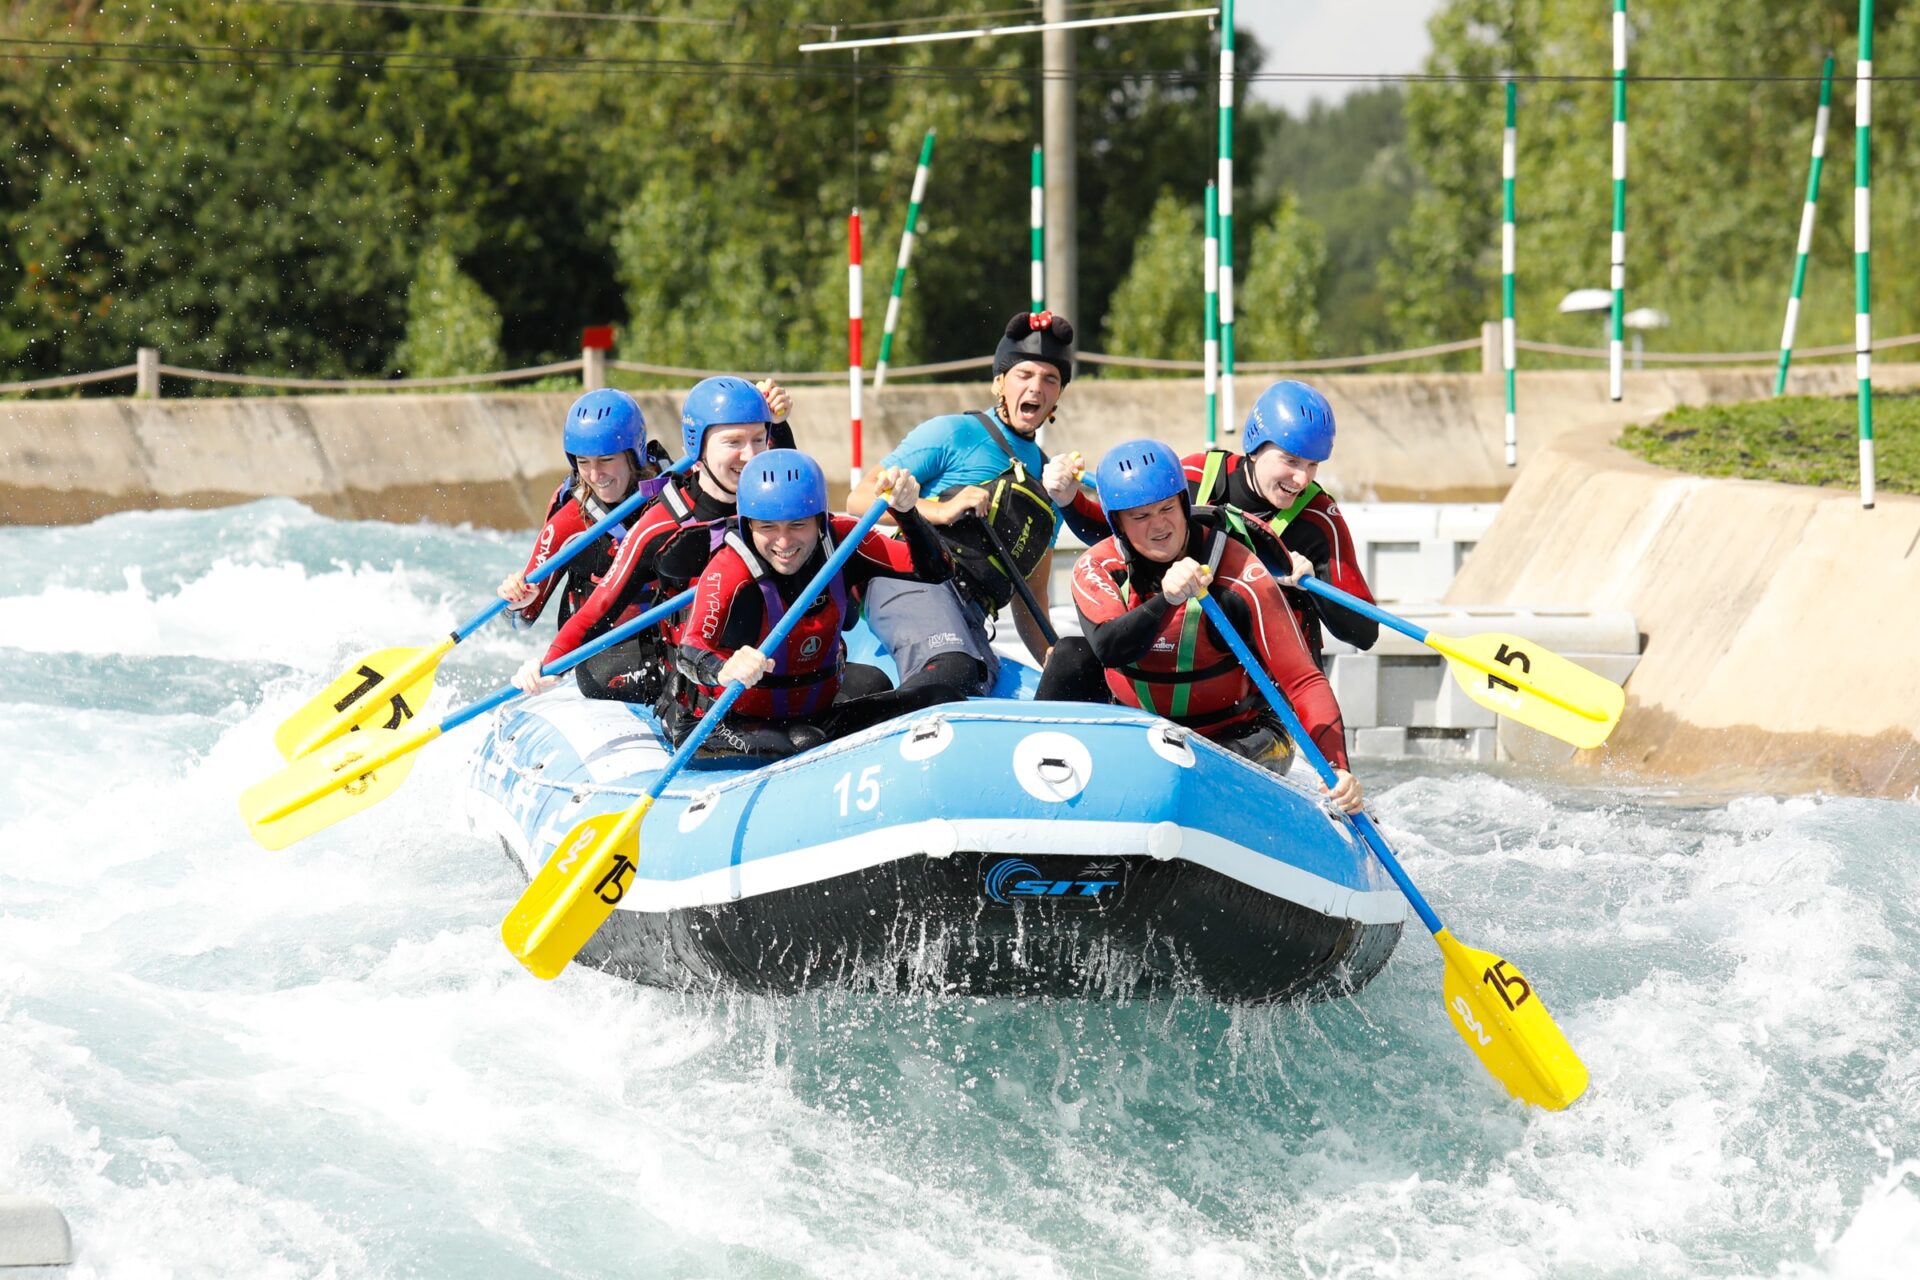 Browser team members on a company day out at Lee Valley White Water Centre